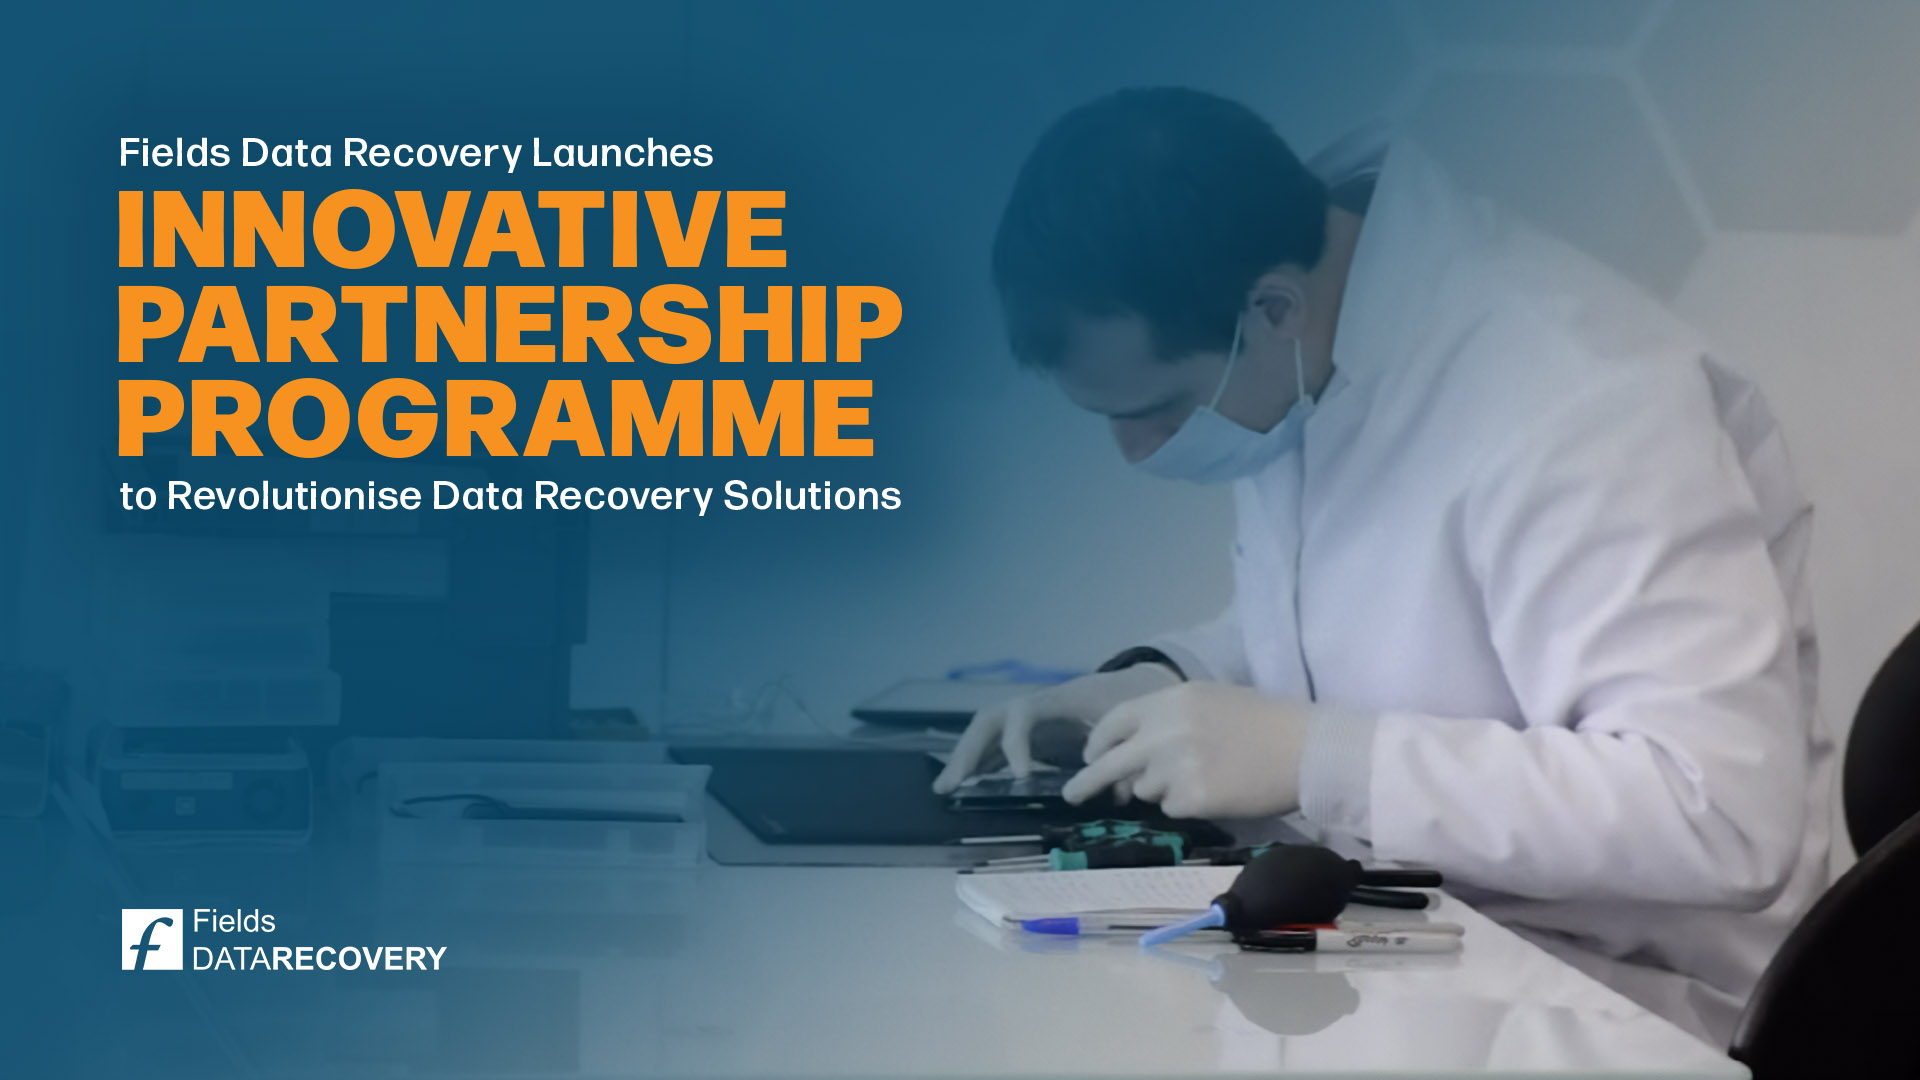 Fields Data Recovery Launches Innovative Partnership Programme to Revolutionise Data Recovery Solutions